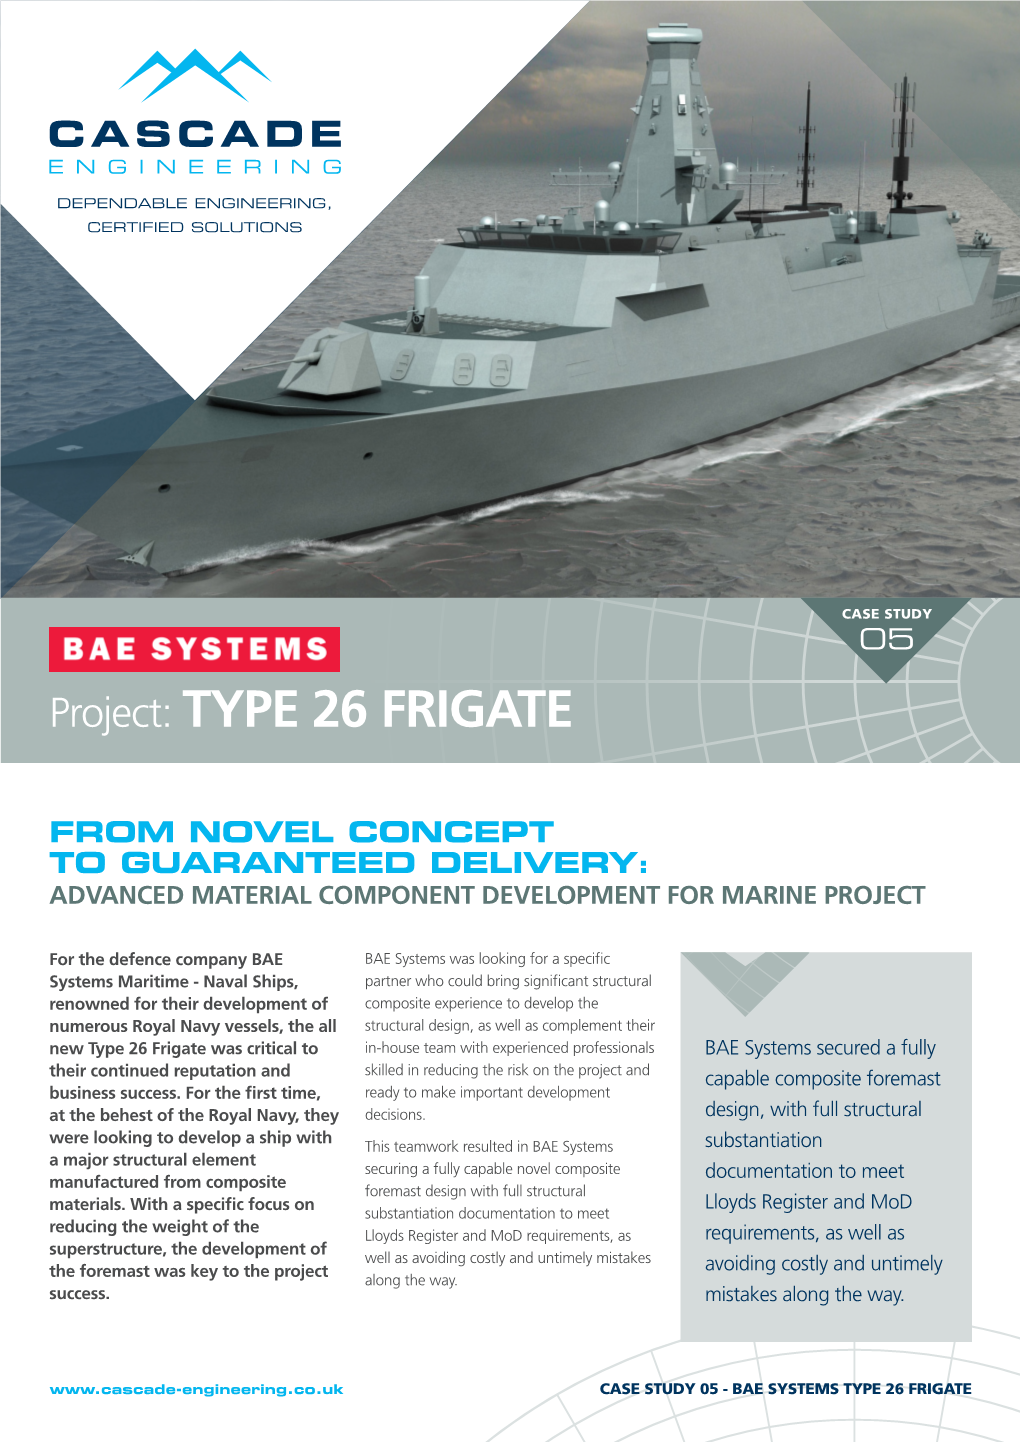 Project: TYPE 26 FRIGATE